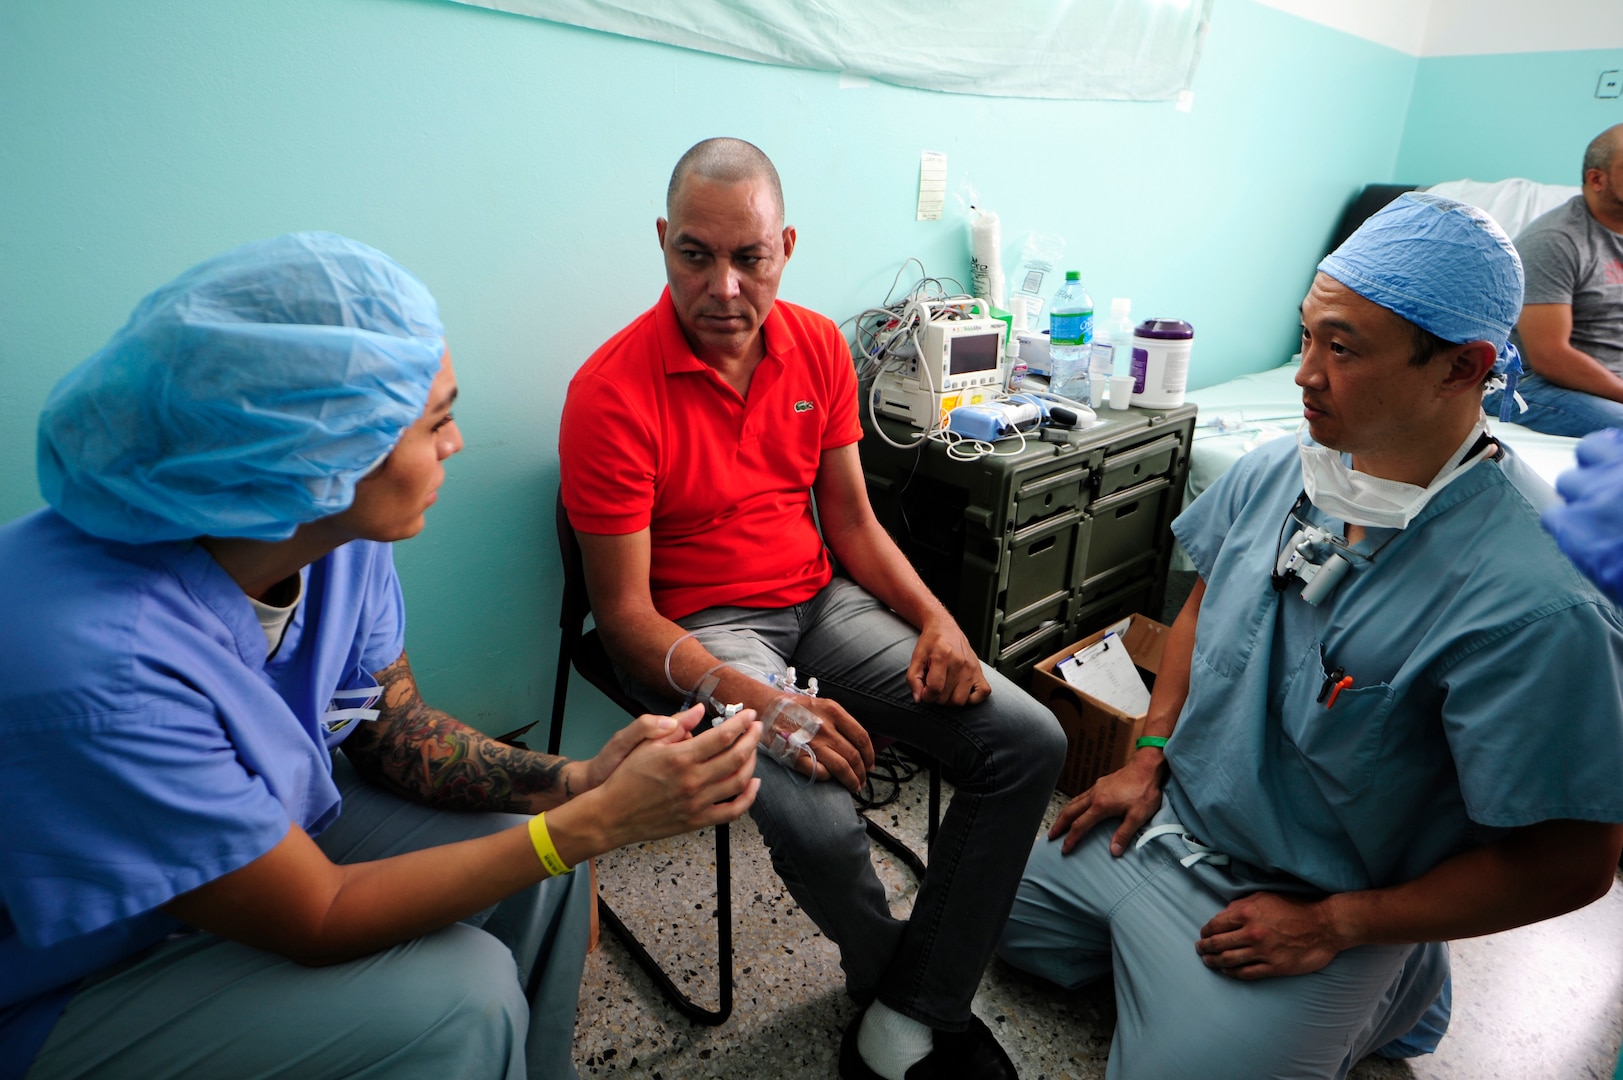 (l-r) Staff Sgt. Isela Gonzalez, 506th Air Expeditionary Group chaplain assistant, translates to Alberto Rosario for Maj. Peter Rhee, 506th Expeditionary Medical Operations Squadron hand surgeon, during a Medical Readiness Training Exercise or MEDRETE as part of NEW HORIZONS 2016. In the span of two-weeks, the orthopedic medical team has treated more than 420 patients and provided 26 specialized orthopedic surgeries. Rhee is deployed from the 59th Medical Wing, Joint Base San Antonio, Texas. (U.S. Air Force photo by Master Sgt. Chenzira Mallory/released)